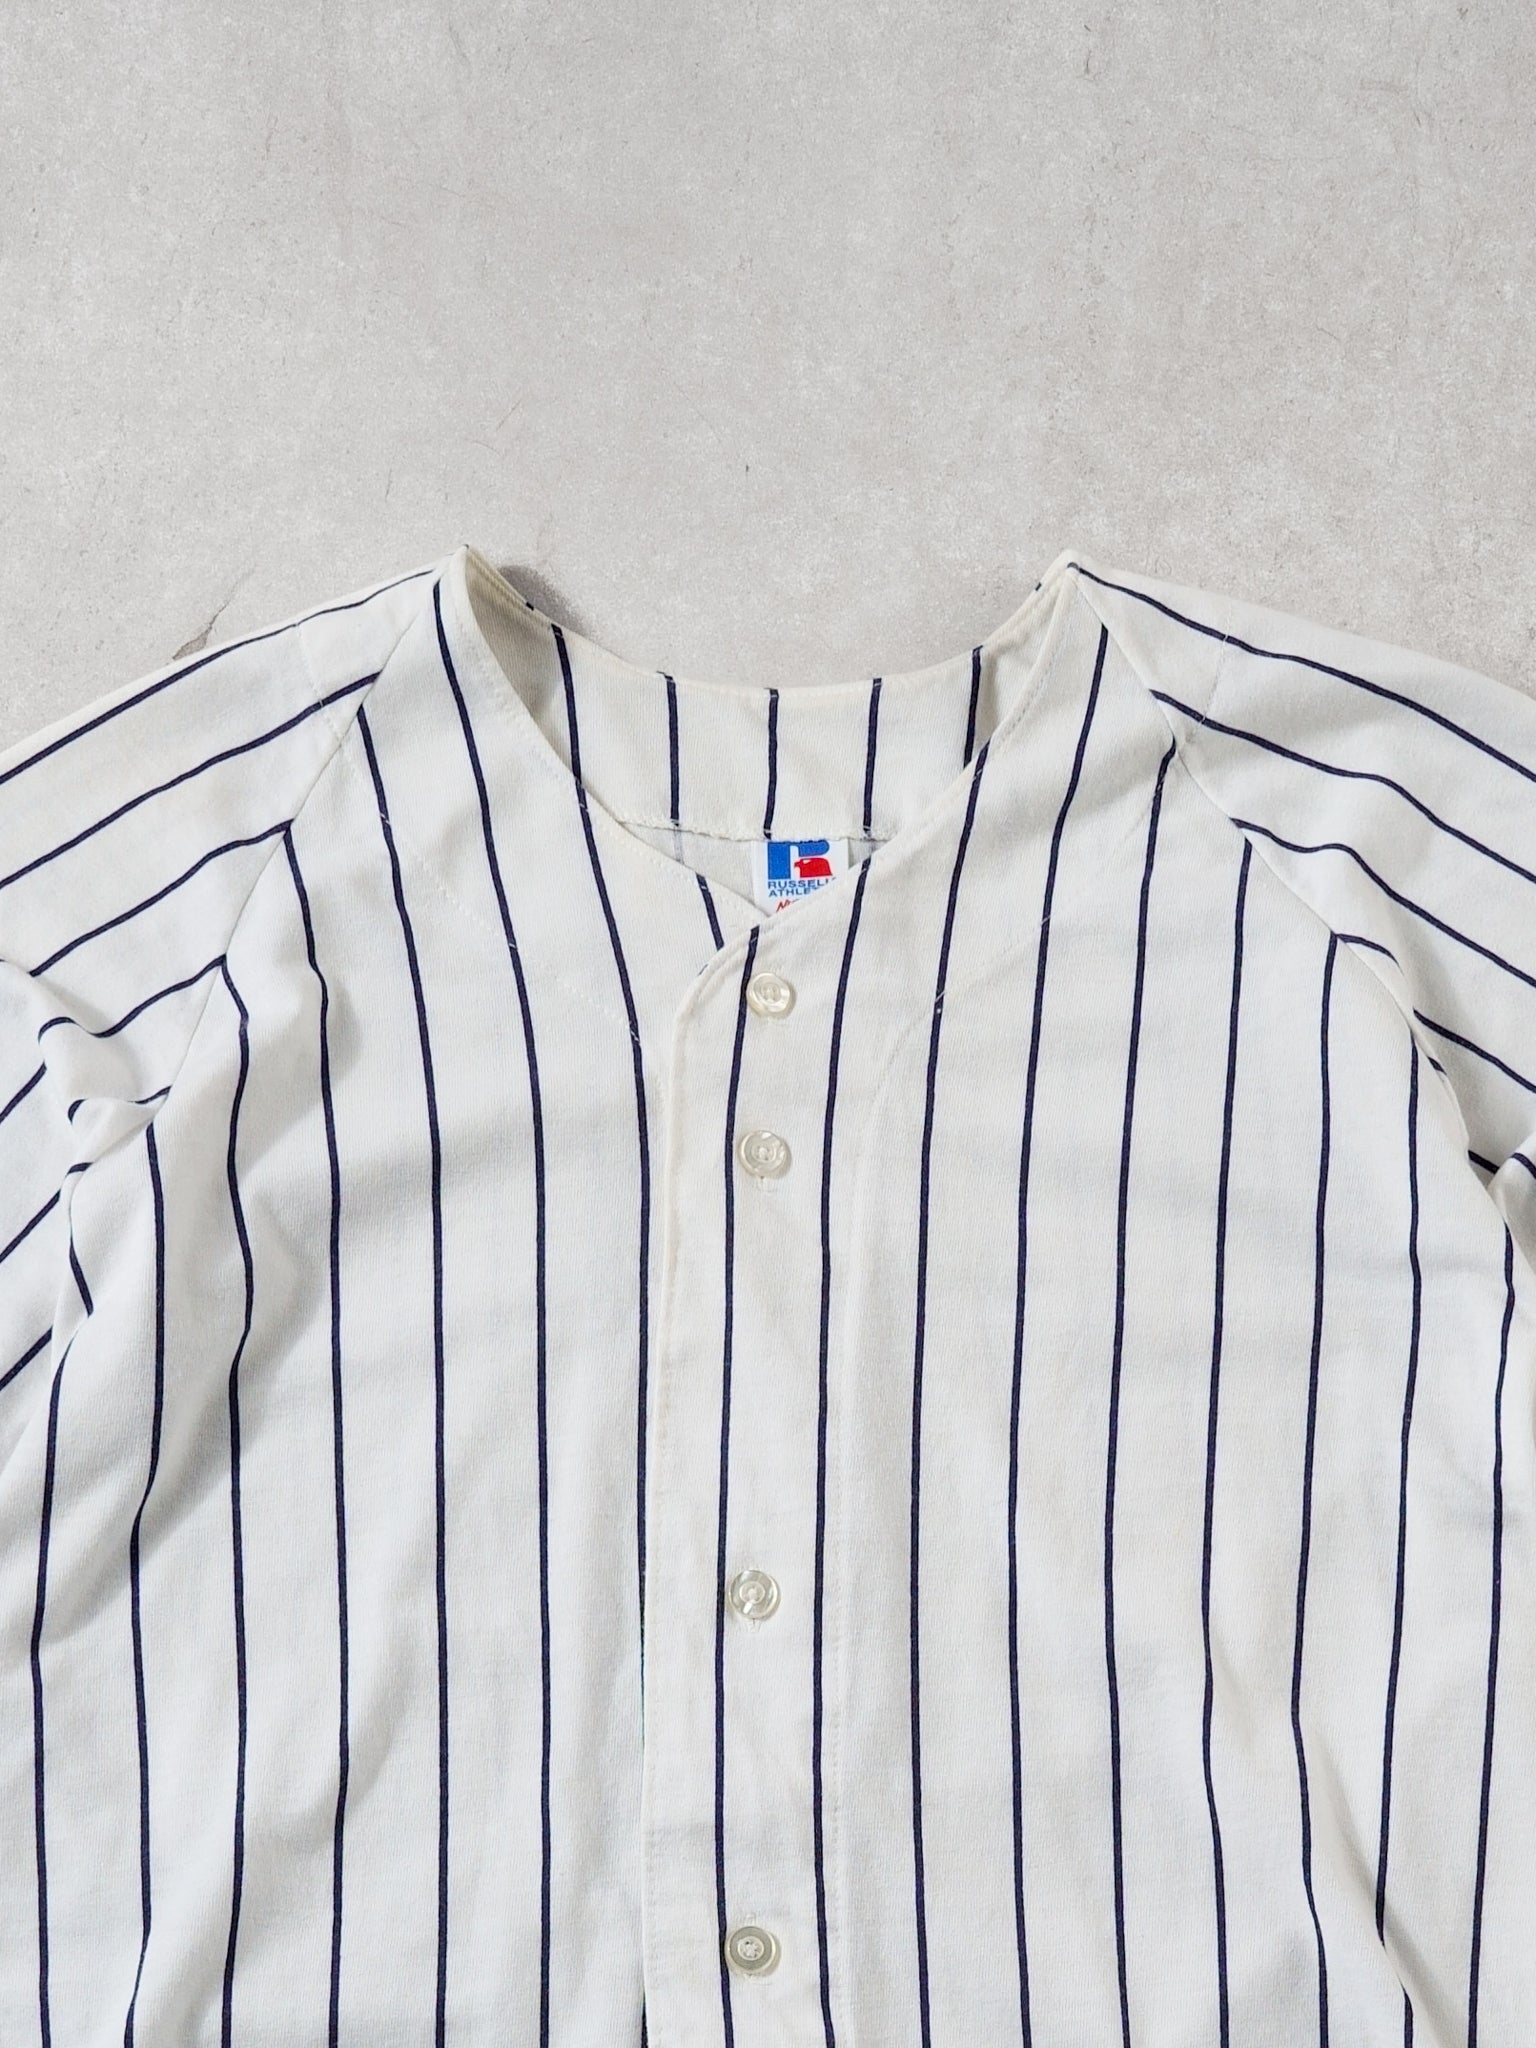 Vintage 90s White Russell Athletics Pine Striped Baseball Jersey (M)